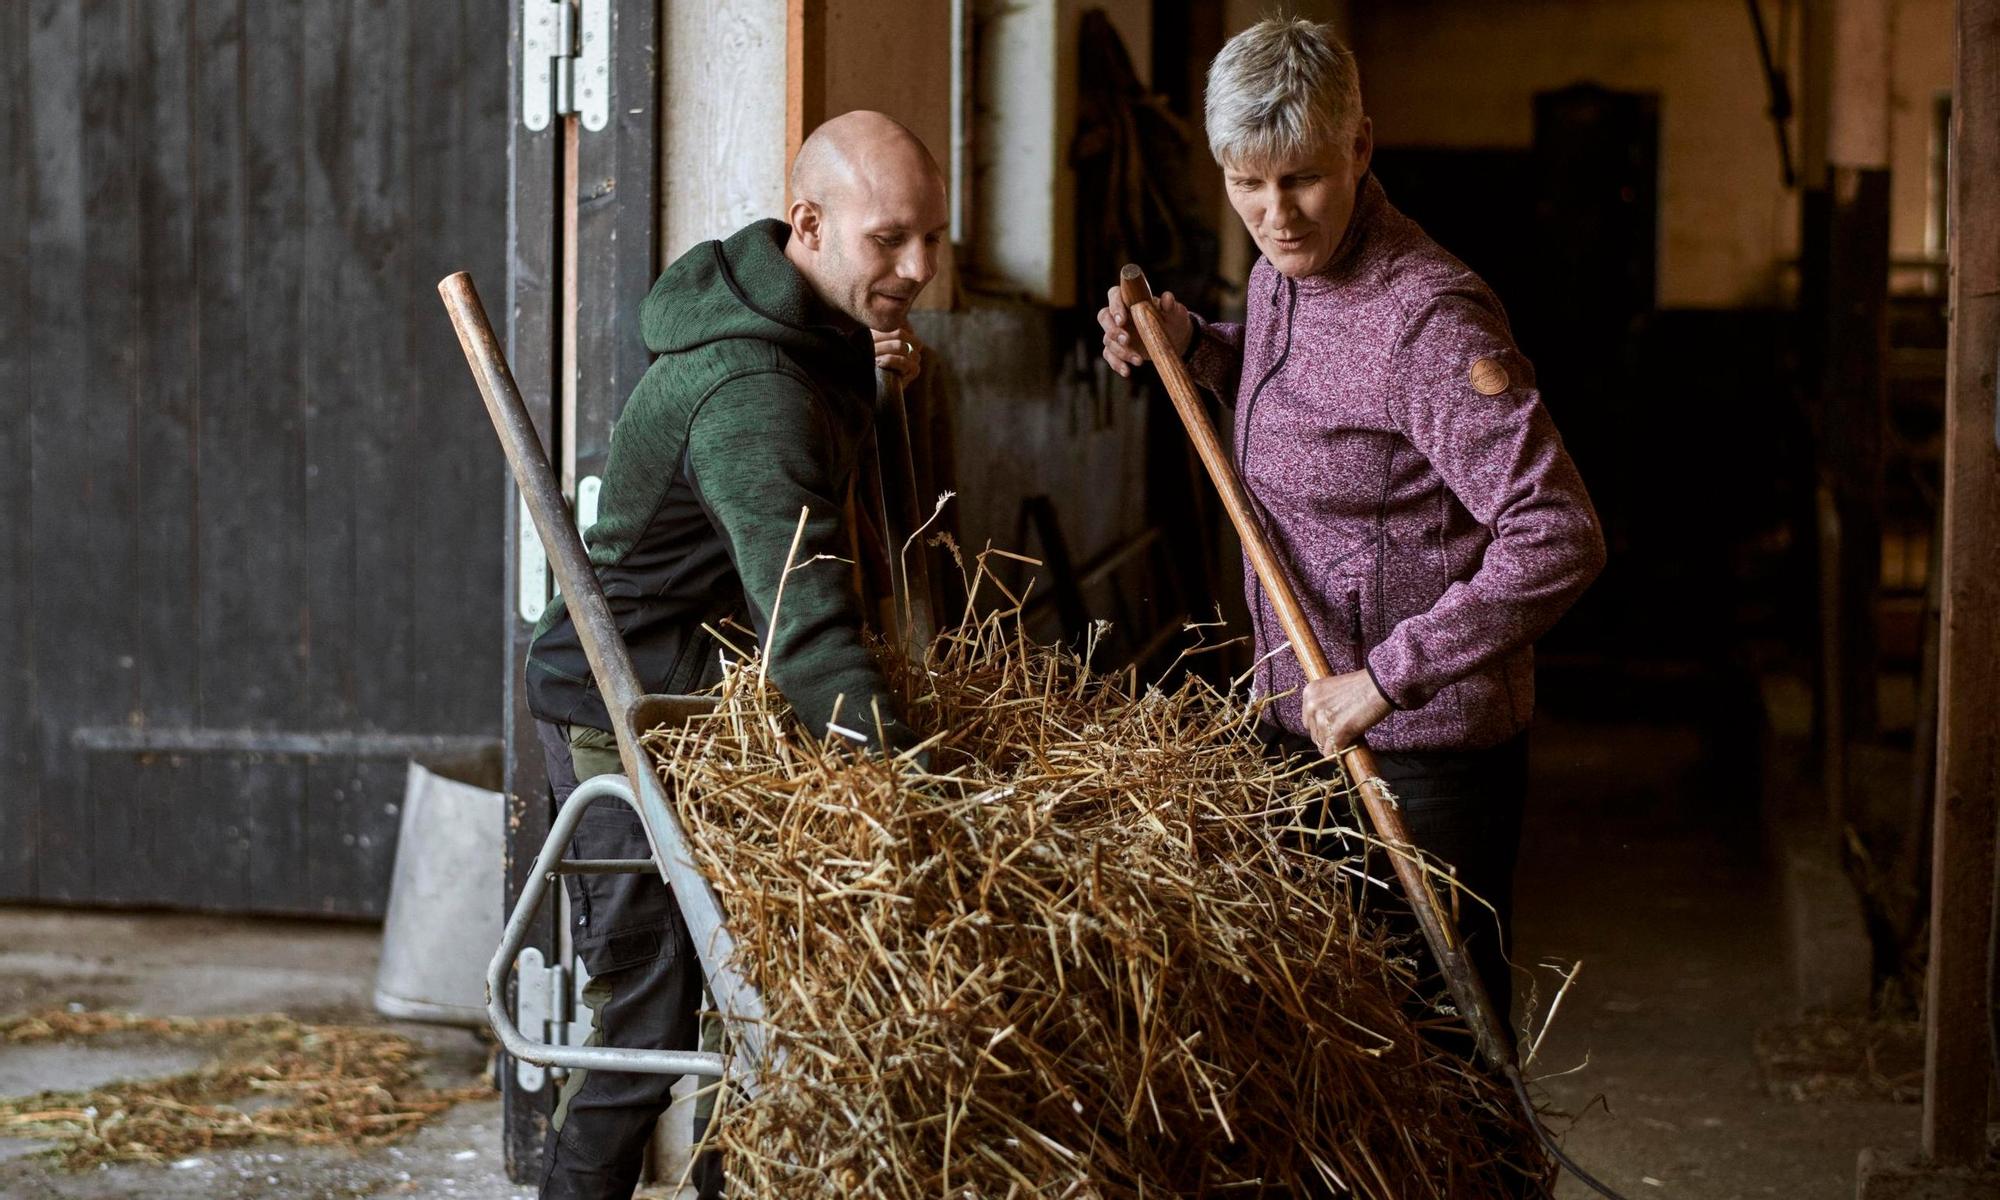 Two farmers packing hay